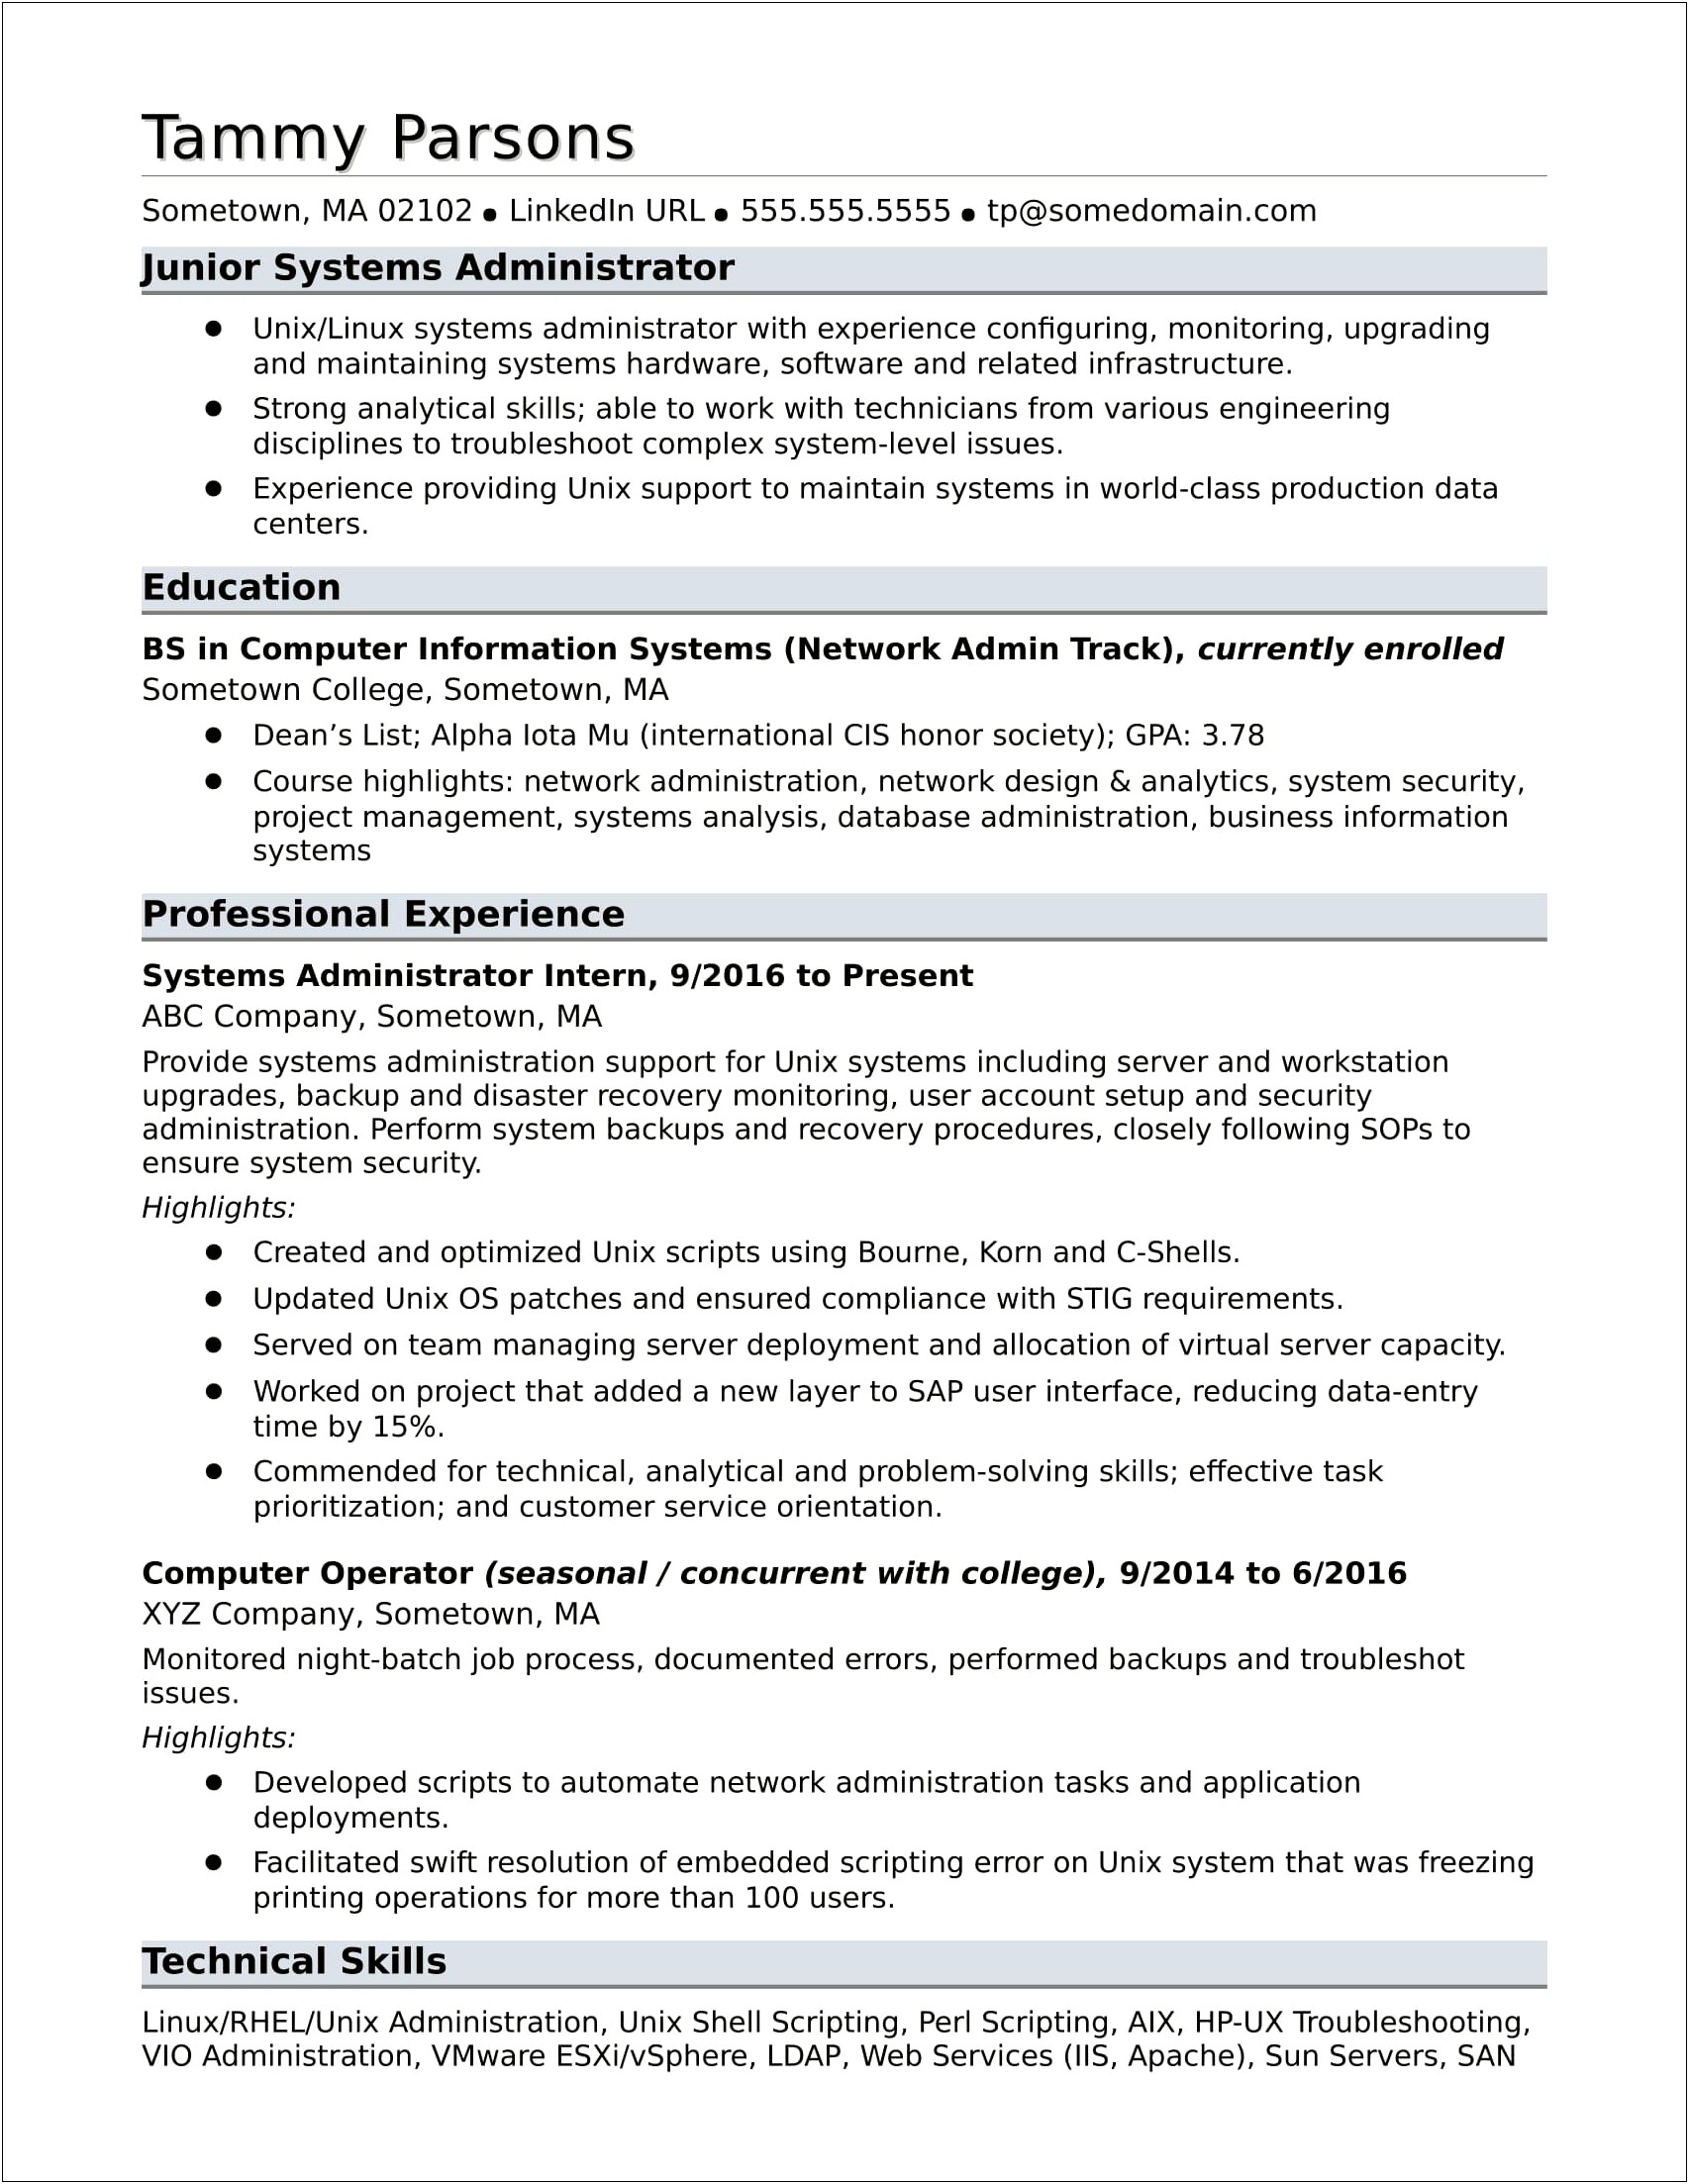 Computer System Skills For Resume